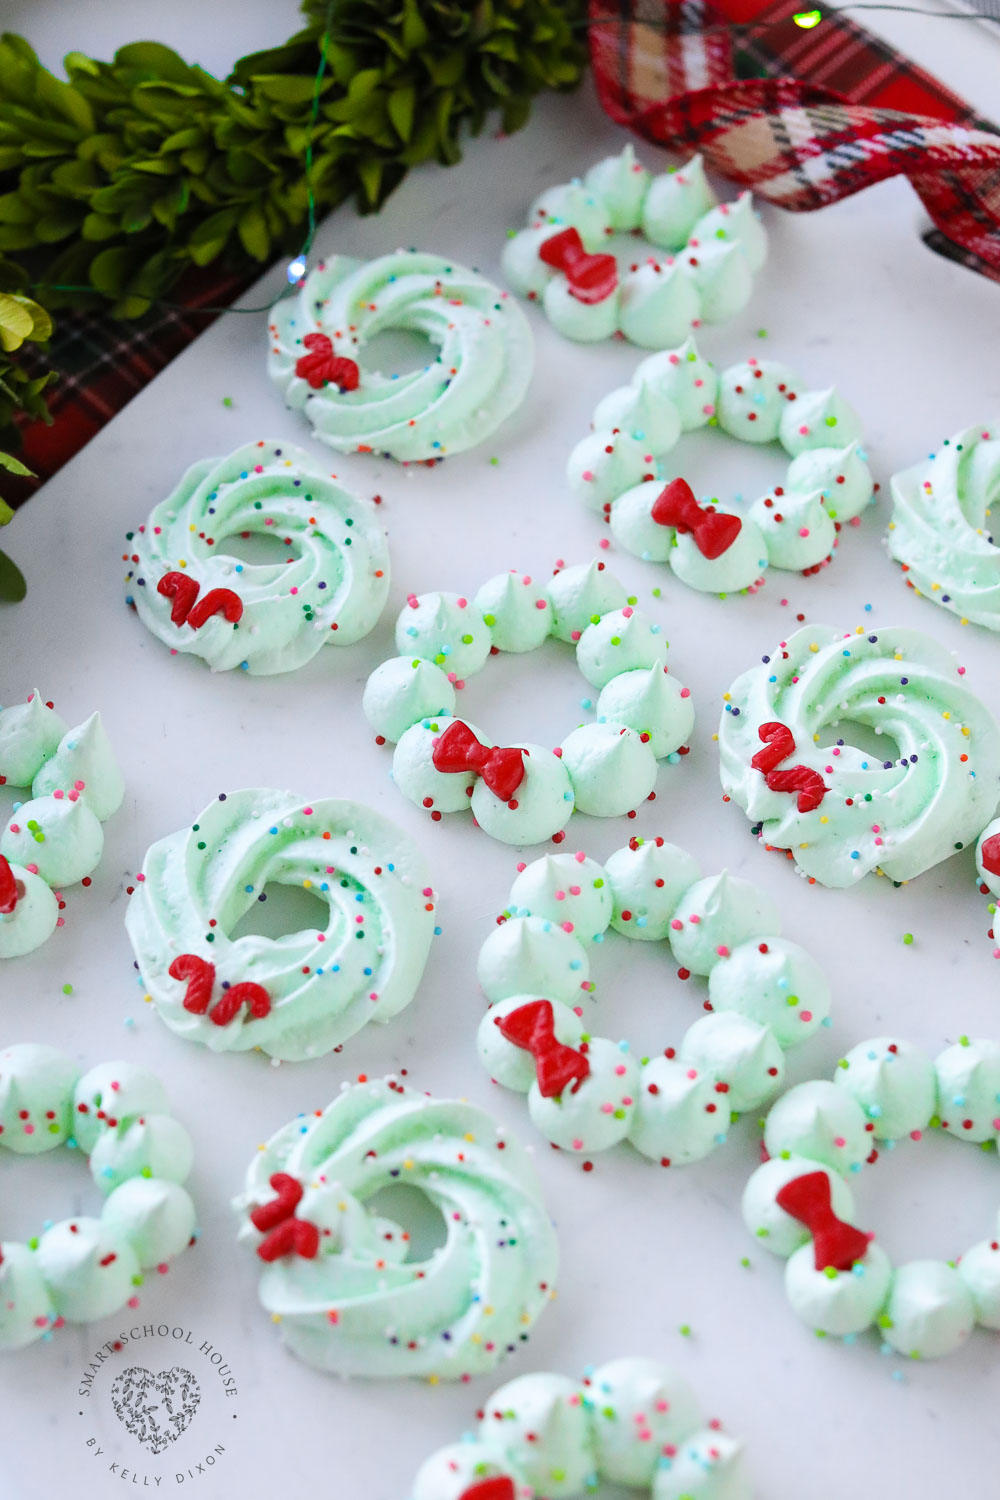 Christmas Meringue Wreath Cookies will put a smile on everyone's face this holiday season! Perfectly sweet and fluffy with an airy crunch.